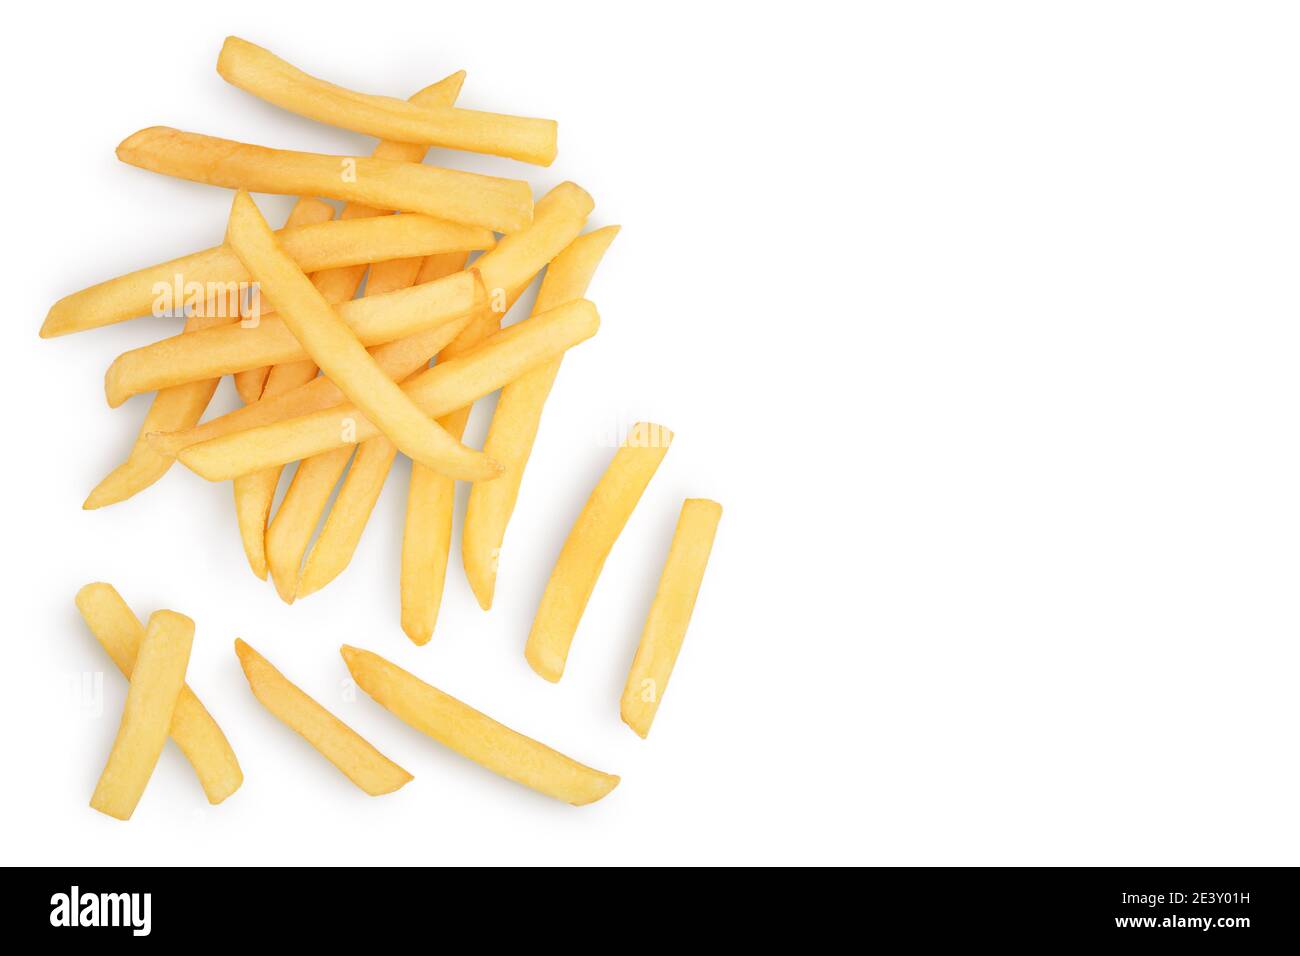 French fries or fried potatoes isolated on white background with clipping path . Top view with copy space for your text. Flat lay Stock Photo